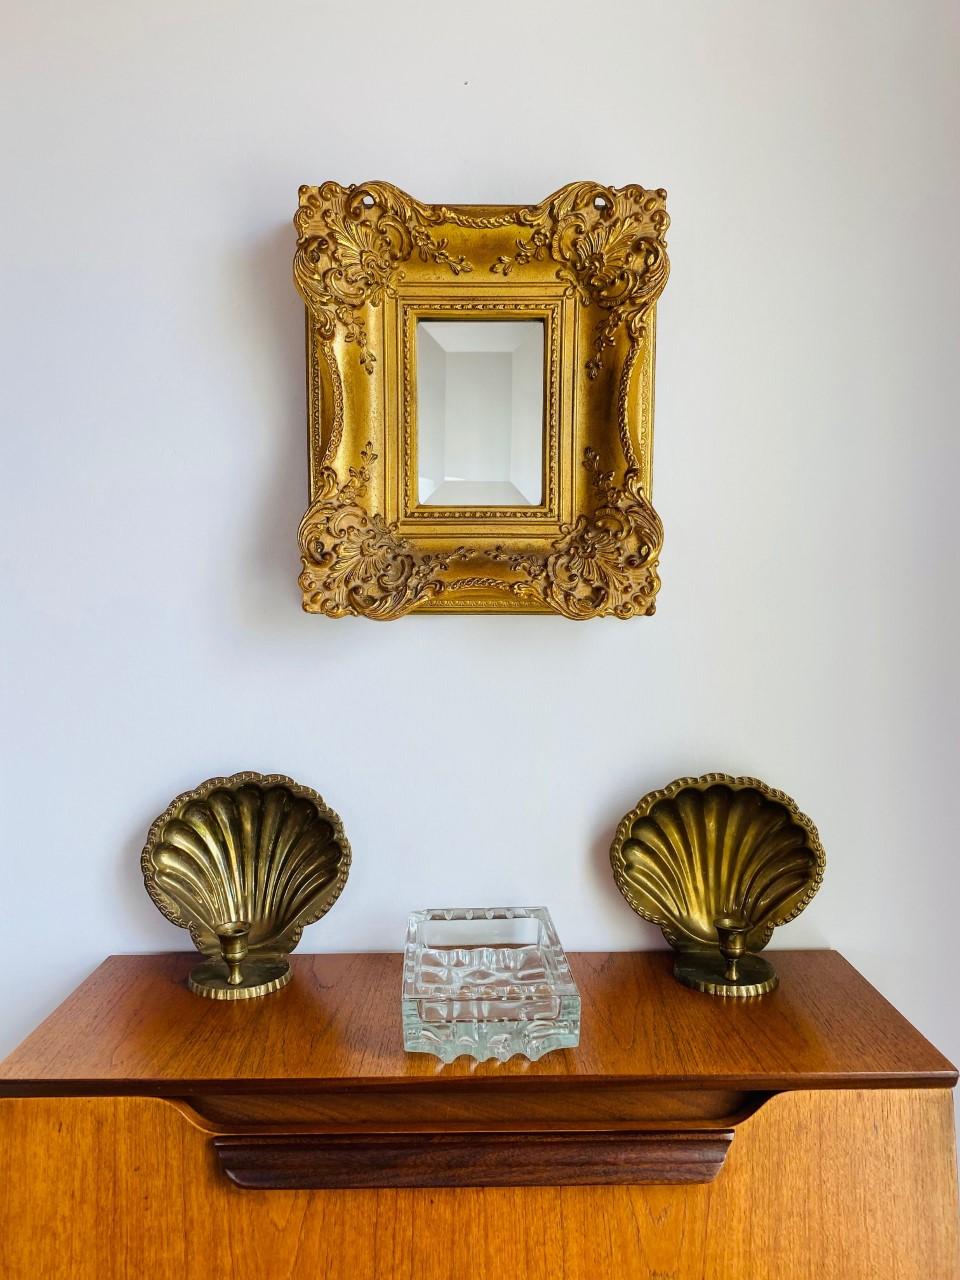 Incredible pair of vintage wall candle holders that can hang on a wall or stylishly rest on a flat surface. This beautiful pair brings out old Hollywood style and glamour to your décor. The scallop profile against brass and candle light will make